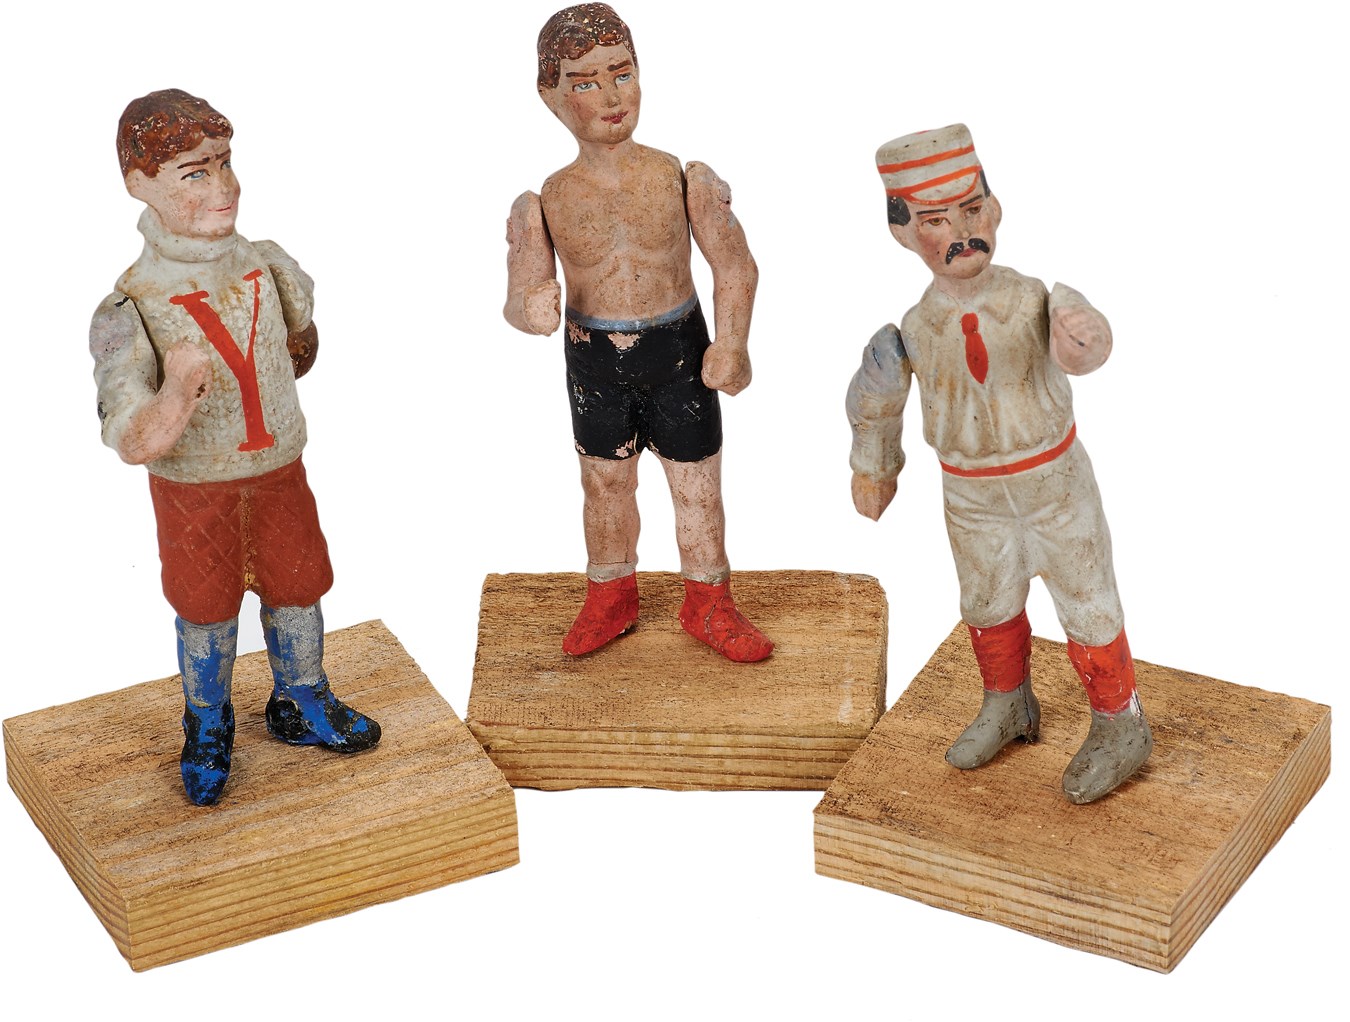 - 1880s Trio of Articulated Sports Figures in Composition - Baseball, Football & Boxing